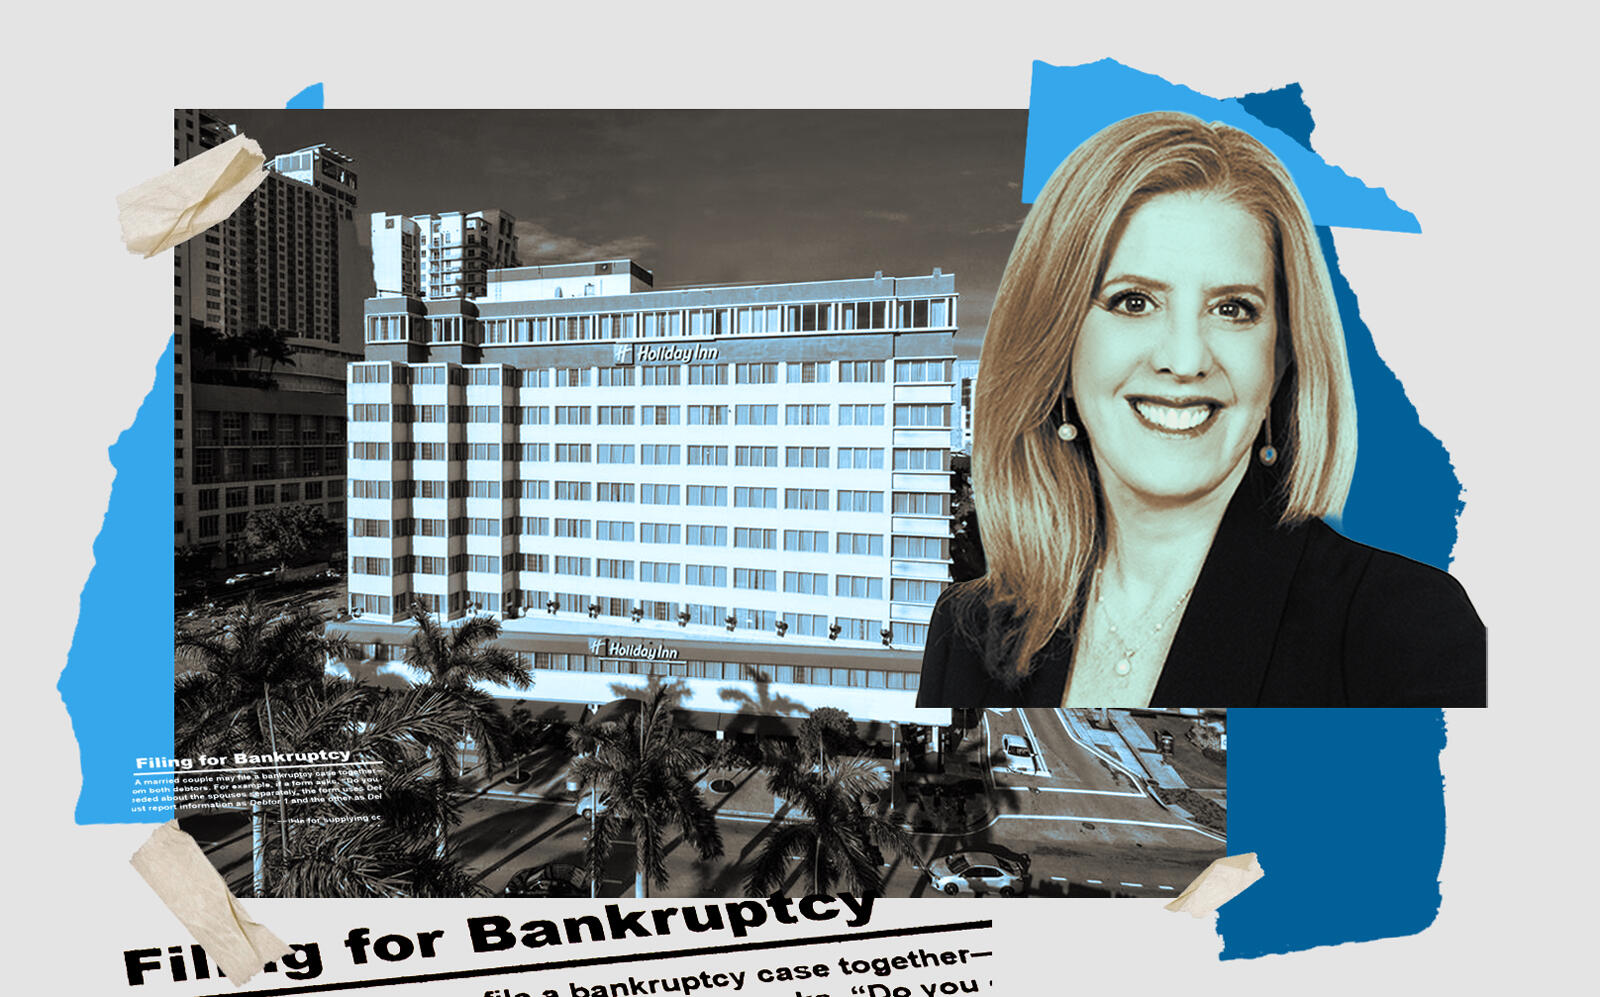 The Holiday Inn at 340 Biscayne Boulevard in Miami and attorney Linda Worton Jackson